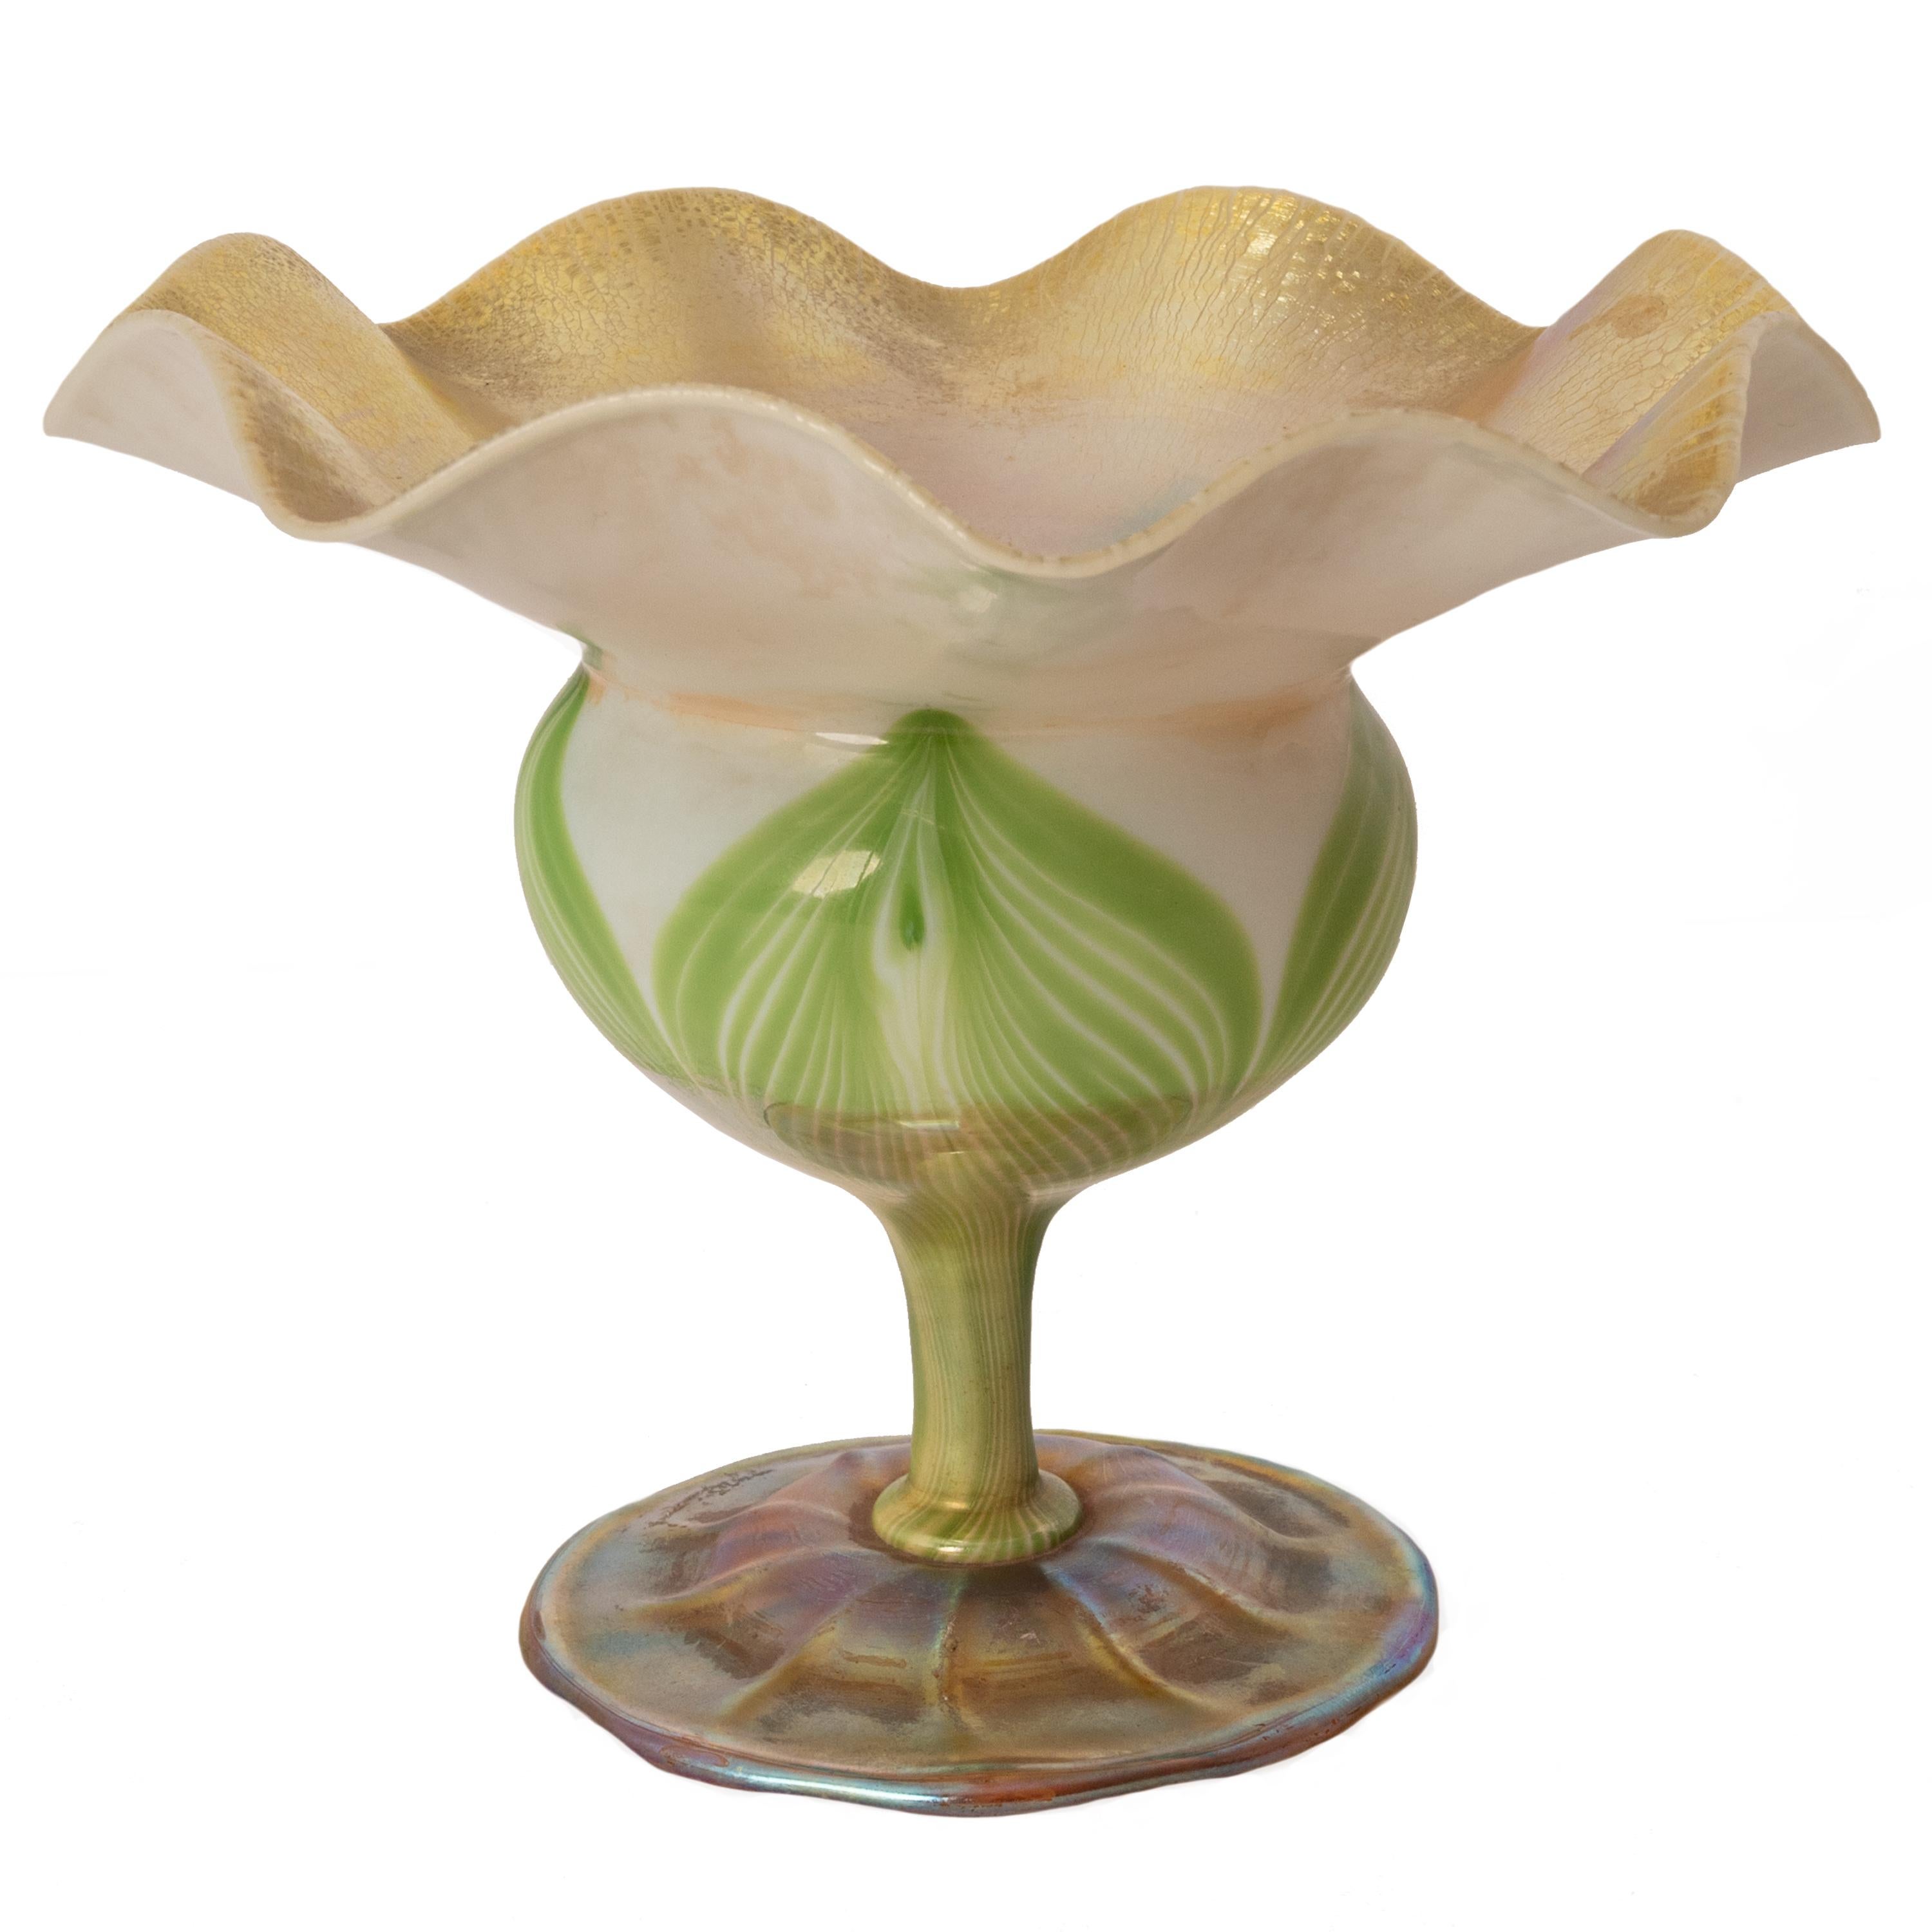 Antique L. C. Tiffany large Favrile iridescent Floriform glass vase, circa 1908.The vase is of larger form than most of this style and handblown with a wavy crimped edge and globular body raised on a stem with a circular ribbed, flared foot. The